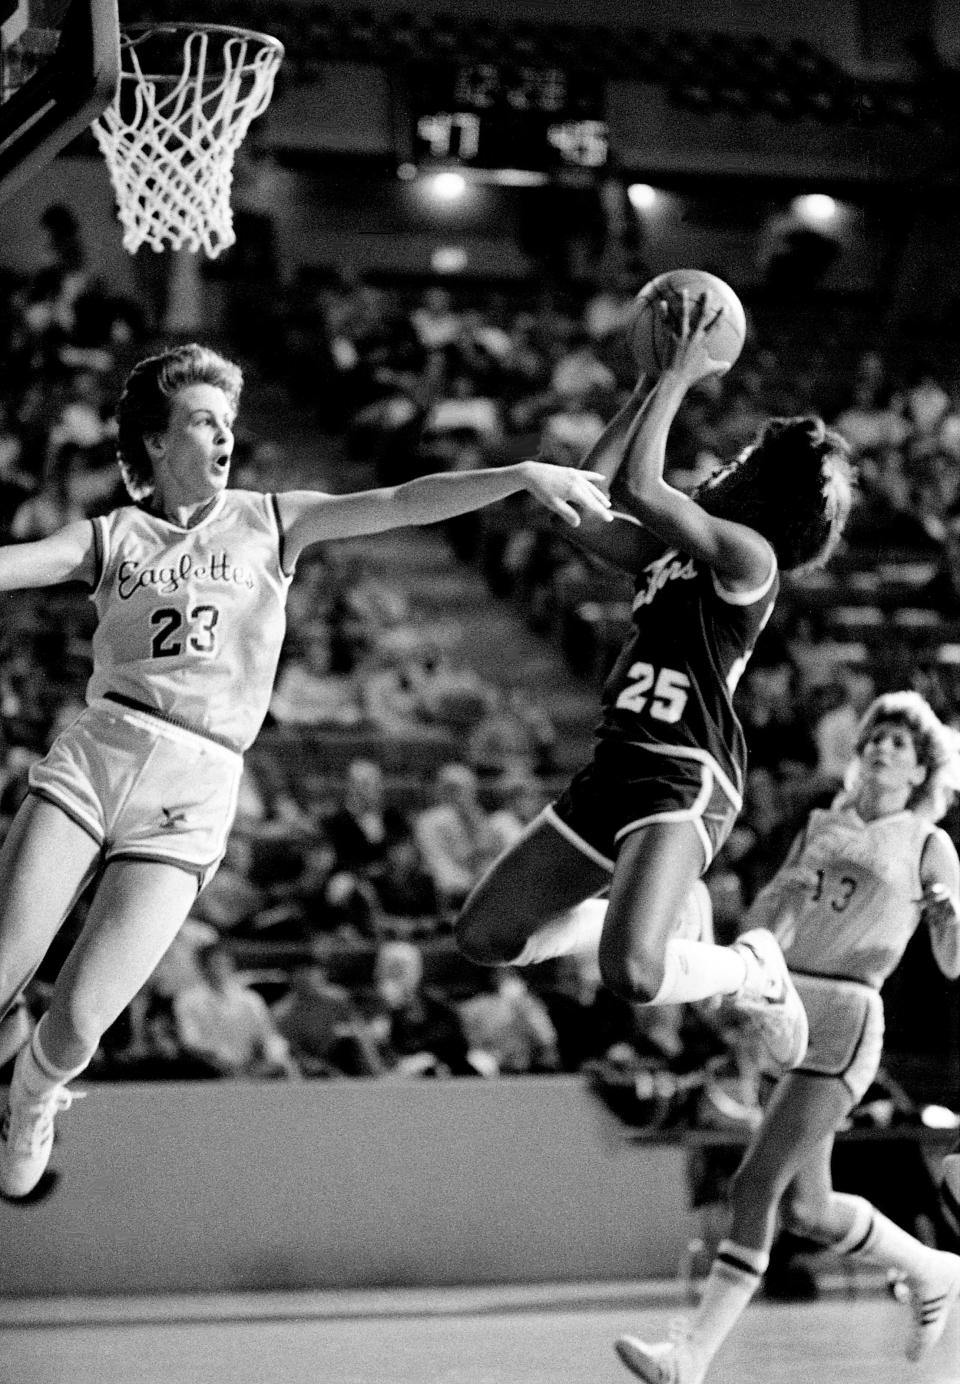 Middle Tennessee State freshman Kim Webb (25) finishes off a drive with a shot at the goal over Tennessee Tech’s Tammy Burton during OVC action on Jan. 7, 1984, at Hooper Eblen Center in Cookeville. MTSU won the game 70-66.